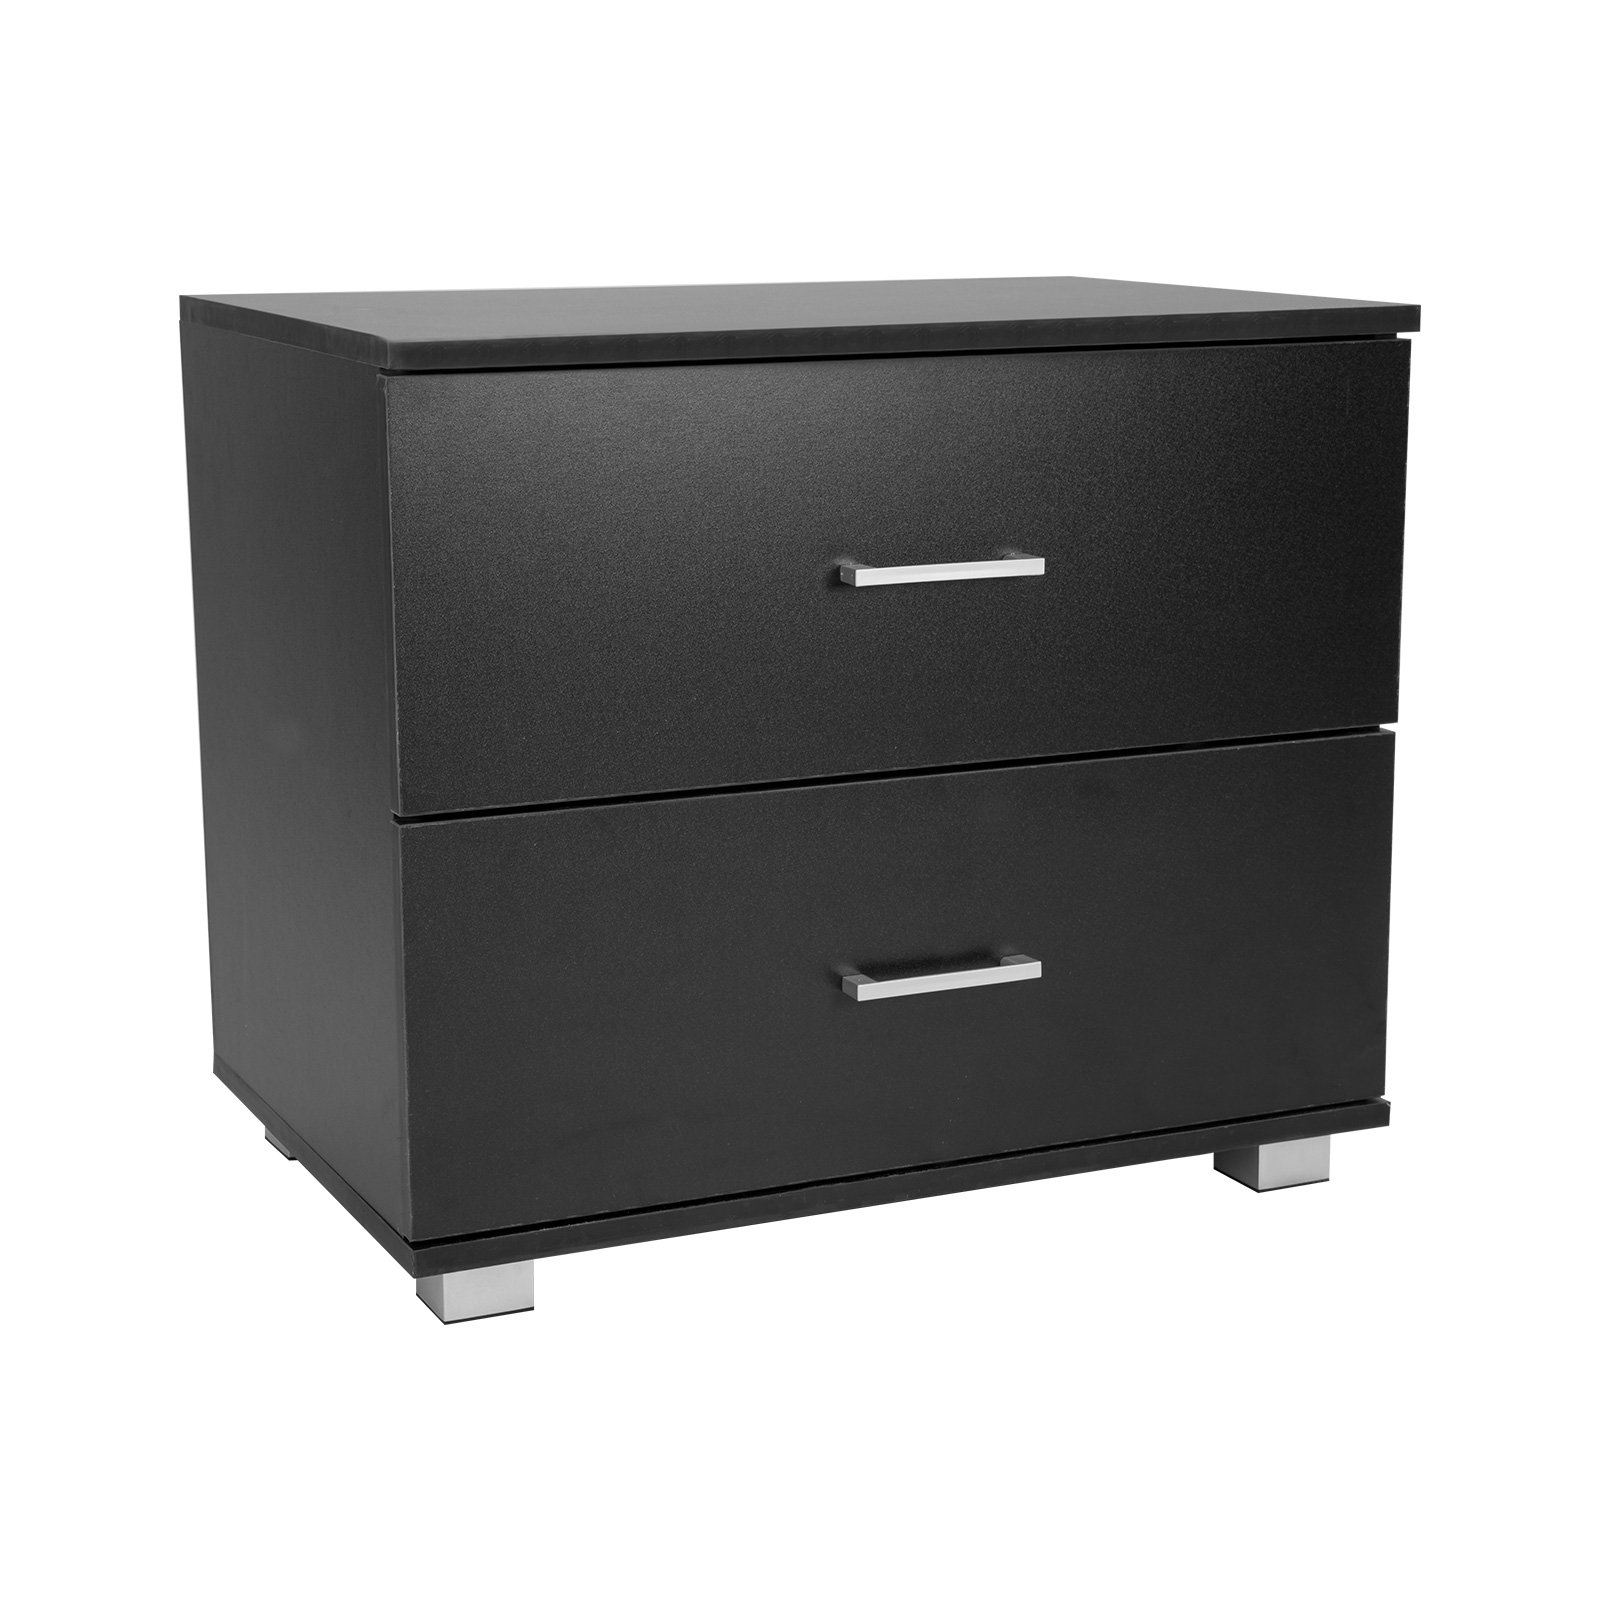 Bedside Table with Drawers MDF Wood - Black 2